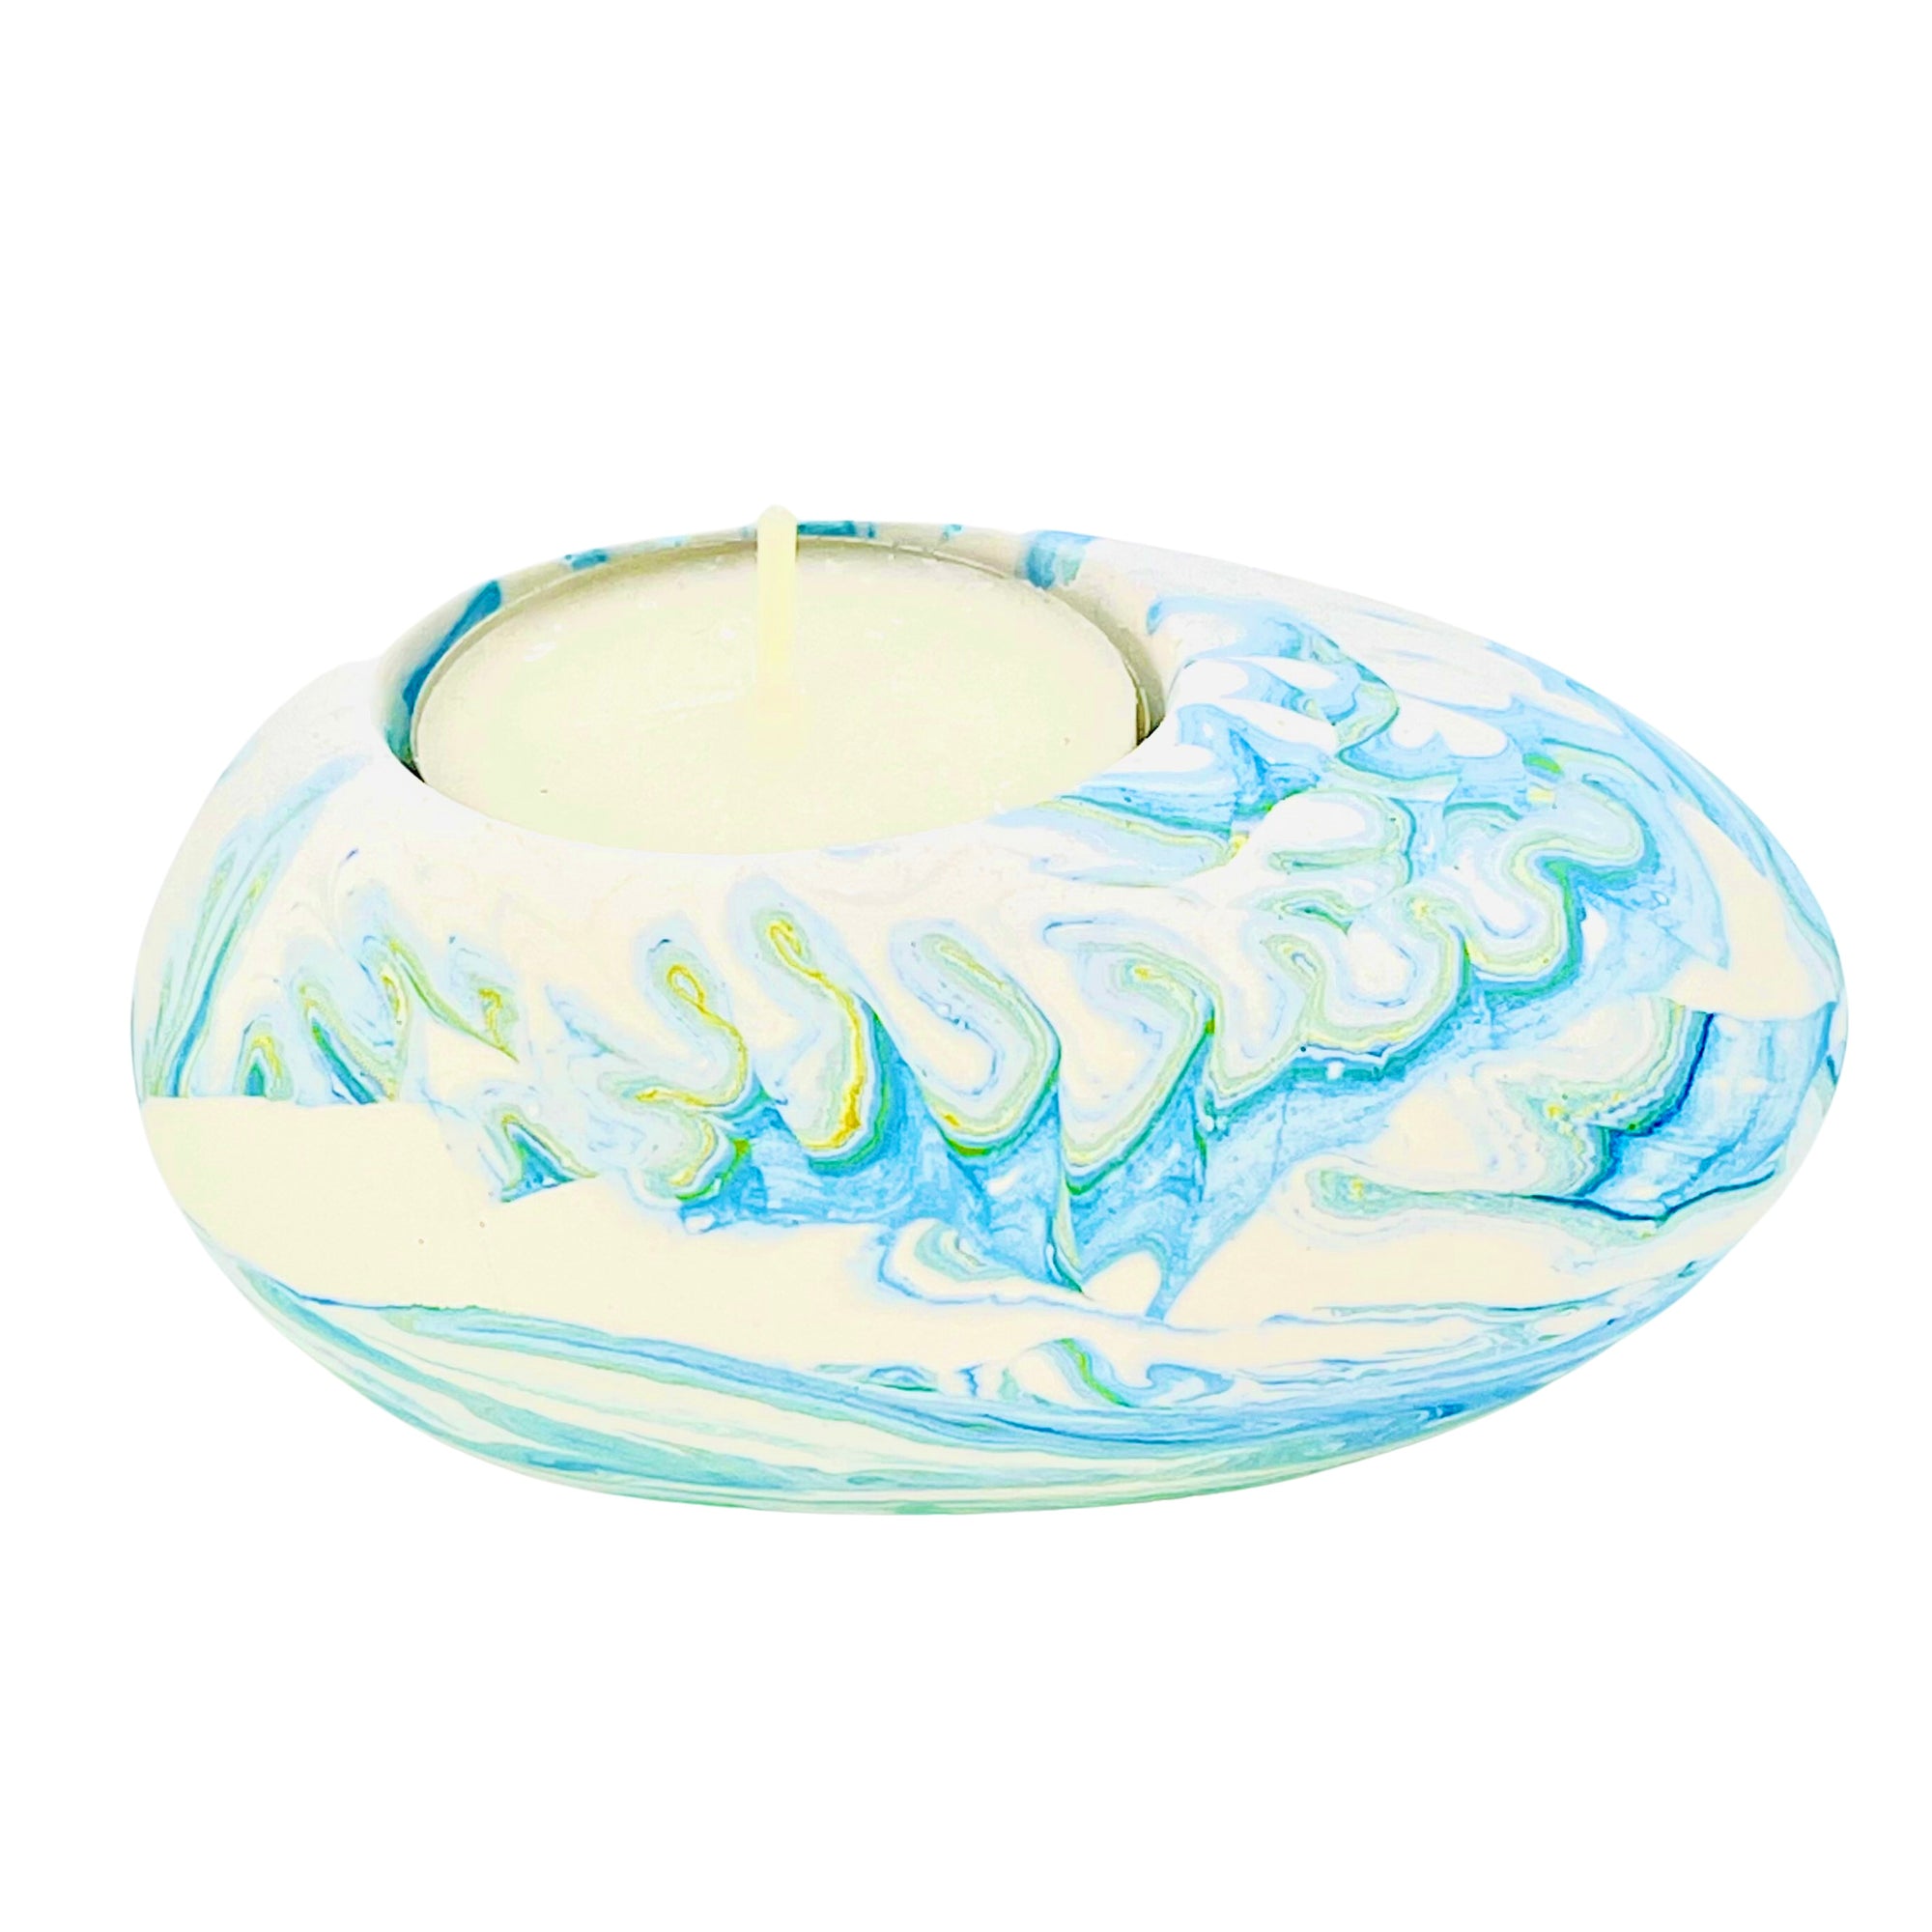 A Jesmonite tealight holder shaped like a pebble measuring 9cm in length and marbled with baby blue pigment.